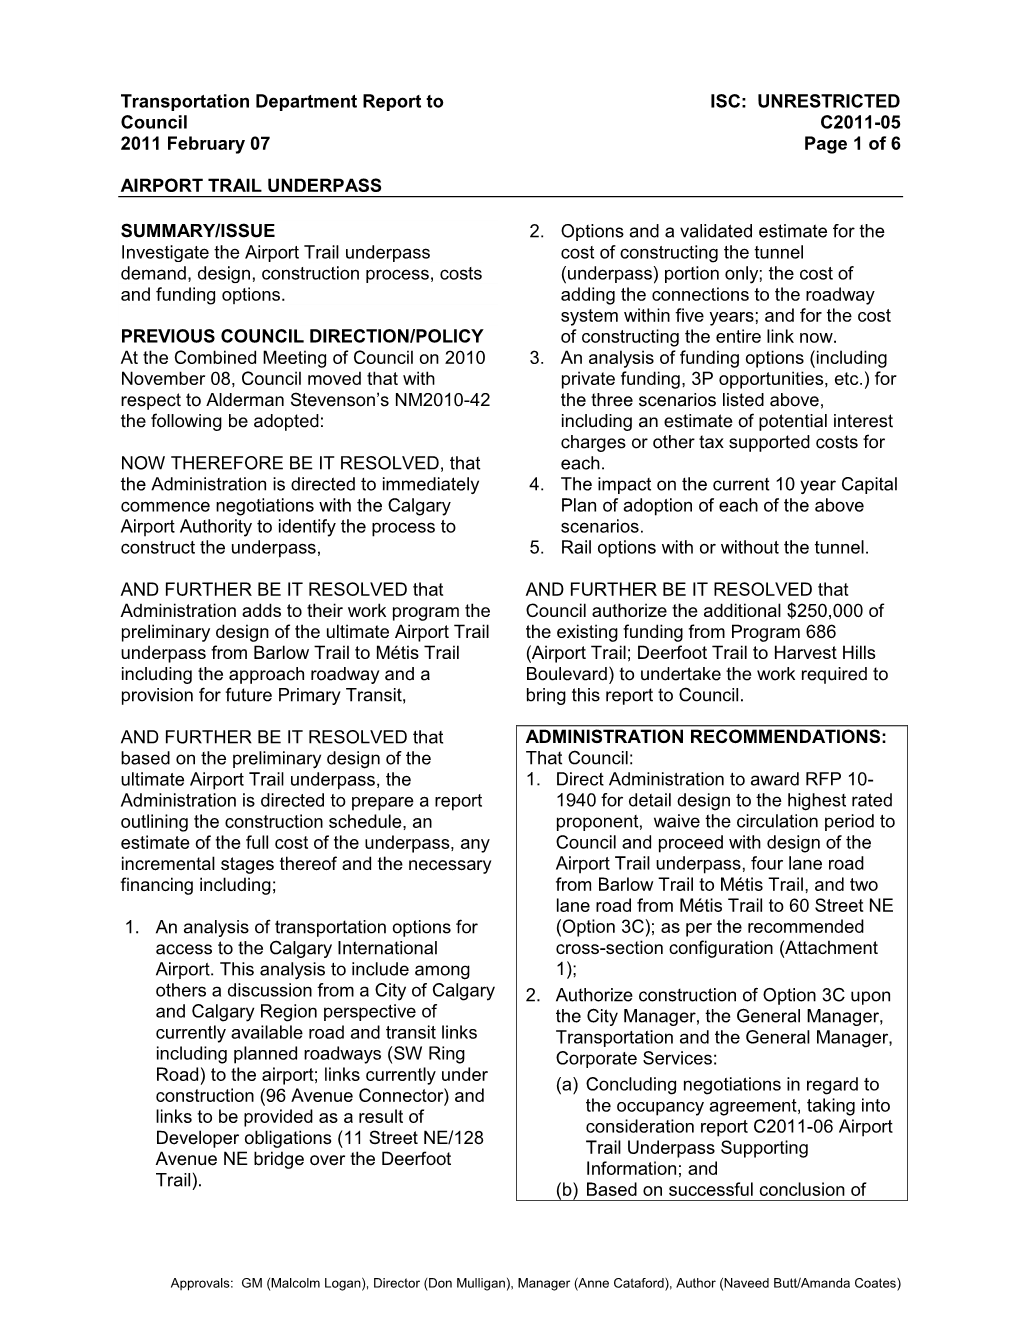 Transportation Department Report to ISC: UNRESTRICTED Council C2011-05 2011 February 07 Page 1 of 6 AIRPORT TRAIL UNDERPASS